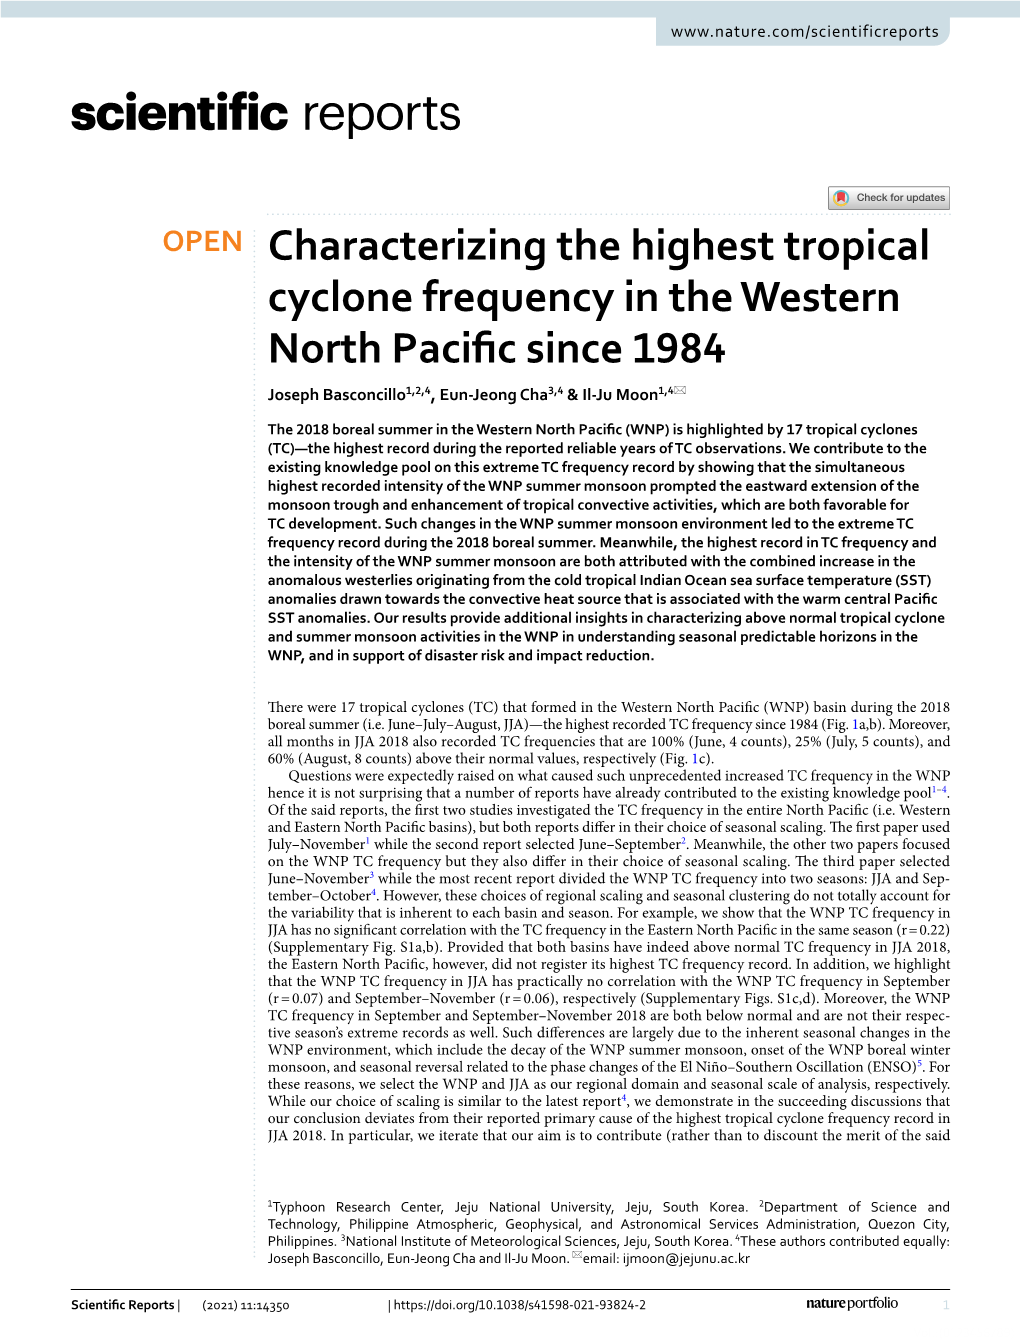 Characterizing the Highest Tropical Cyclone Frequency in the Western North Pacifc Since 1984 Joseph Basconcillo1,2,4, Eun‑Jeong Cha3,4 & Il‑Ju Moon1,4*